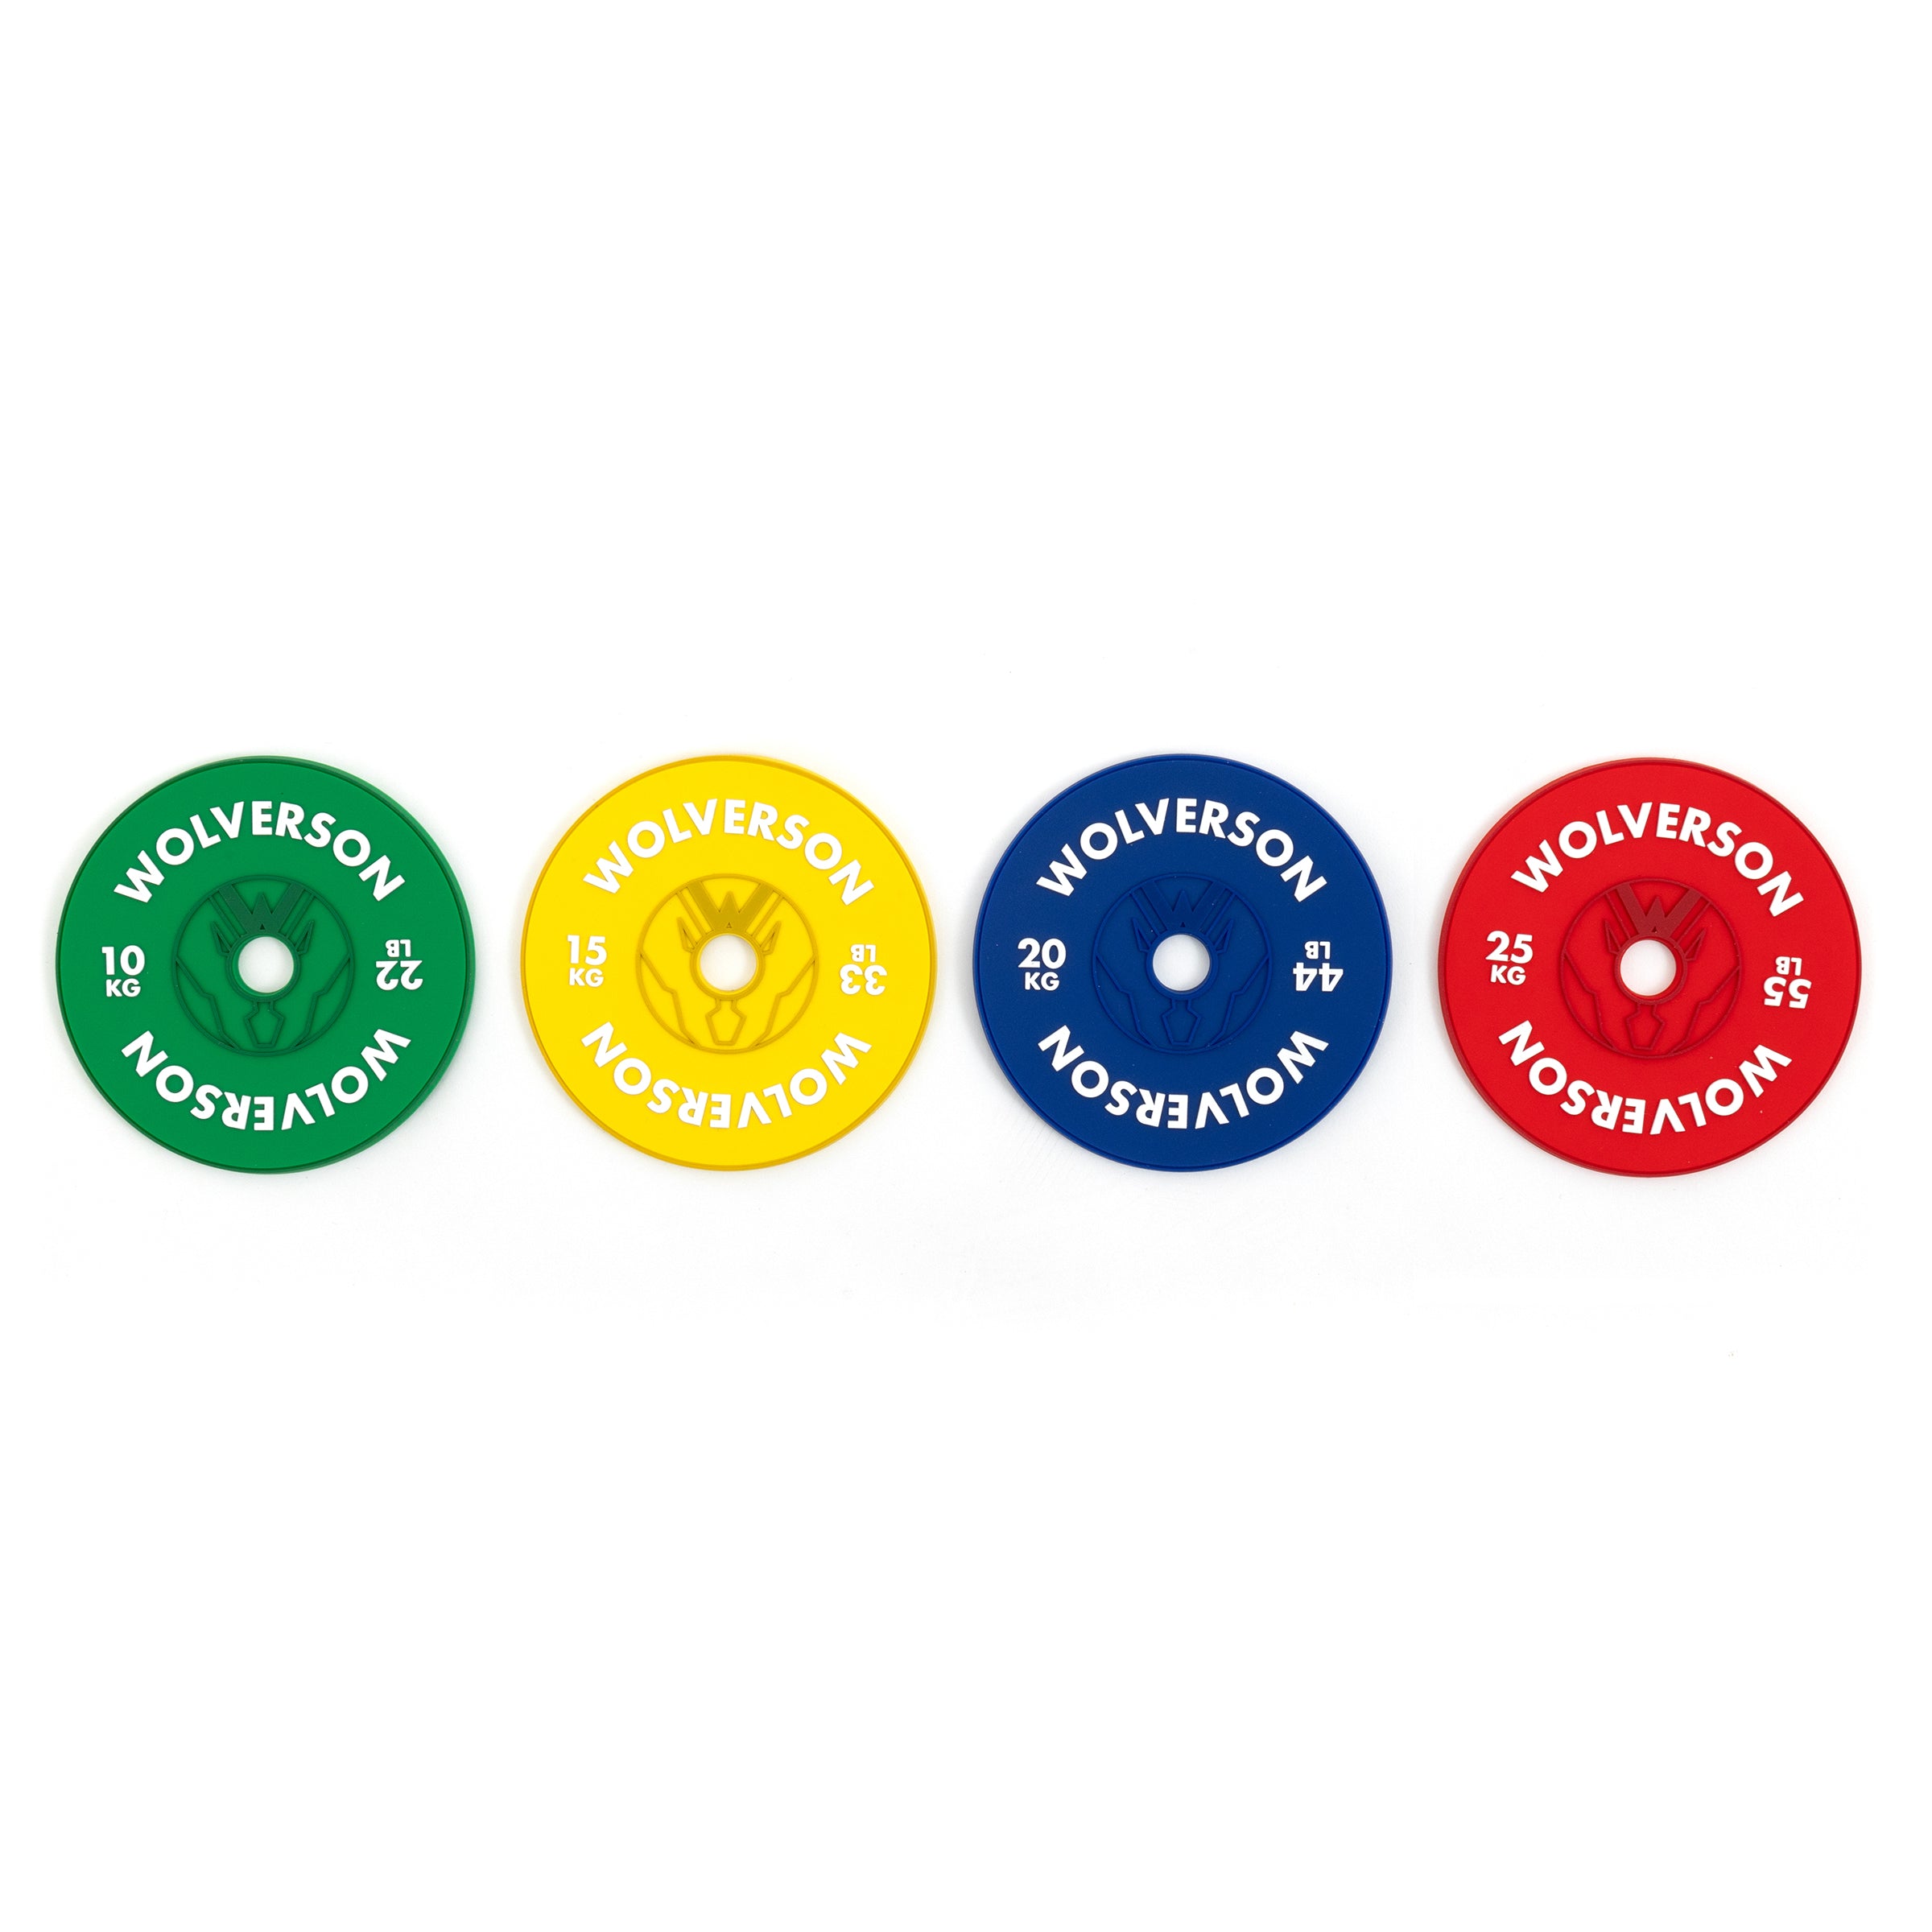 Wolverson Bumper Plate Coasters (4 Pack)